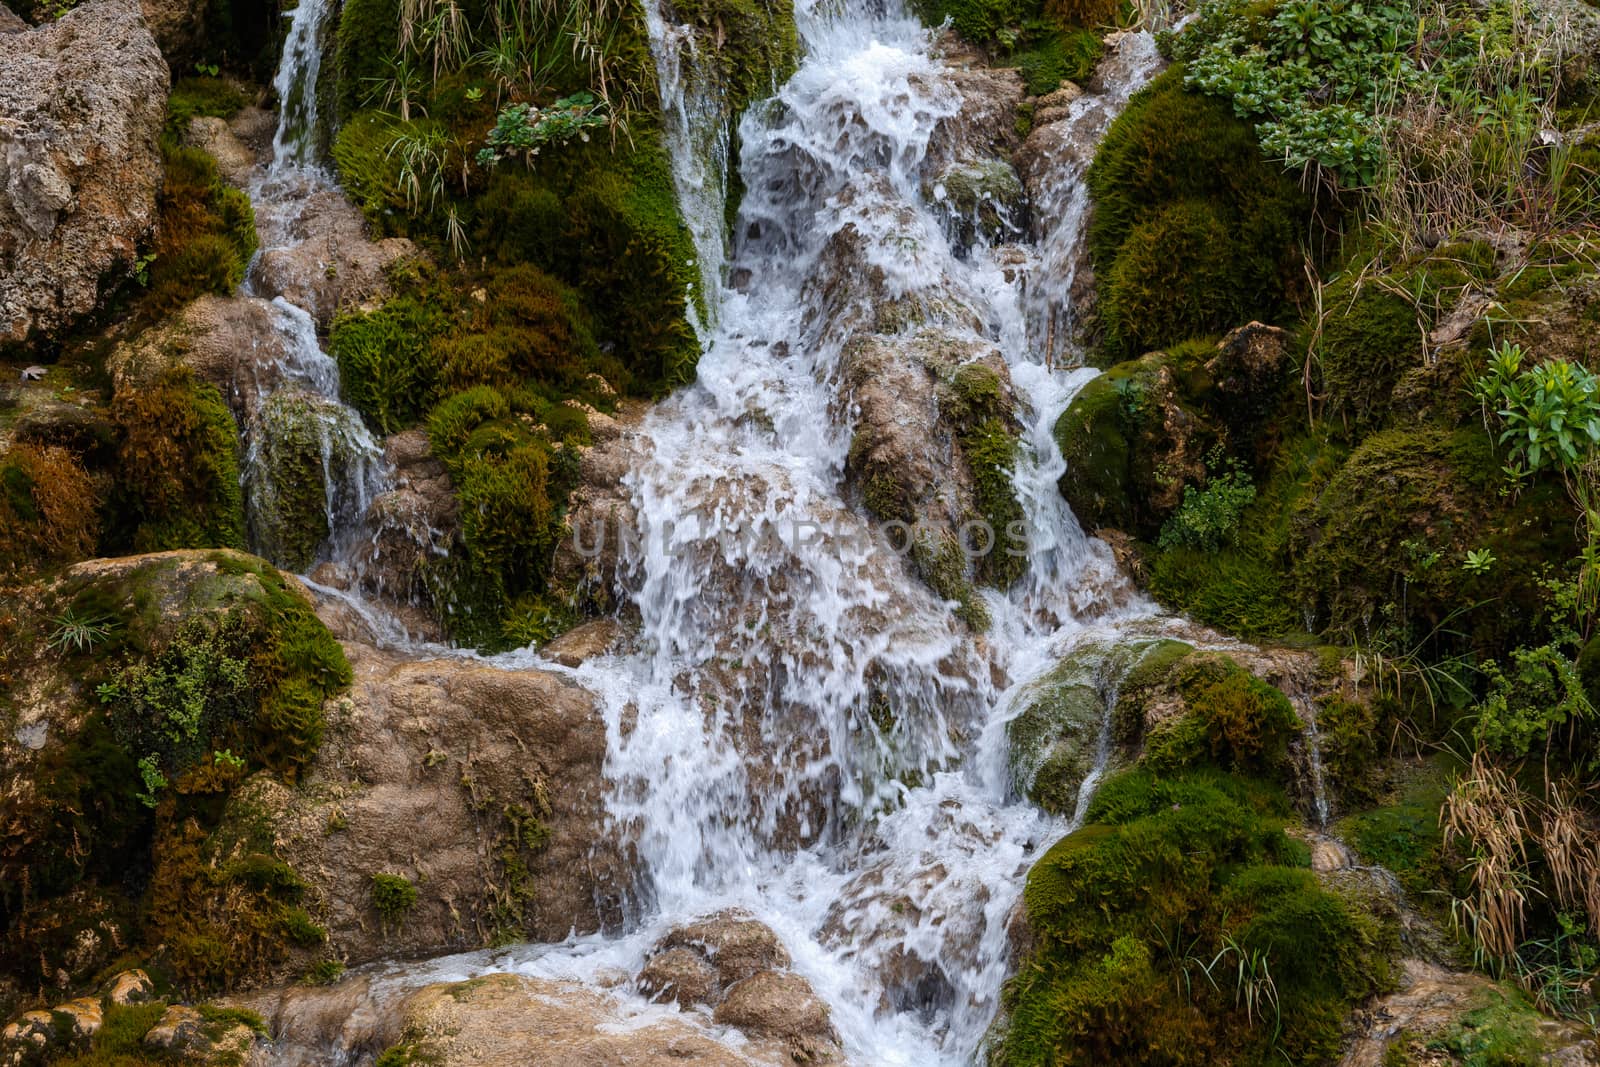 View of a waterfall, flowing from high inside meadow area, with green trees and plants around.